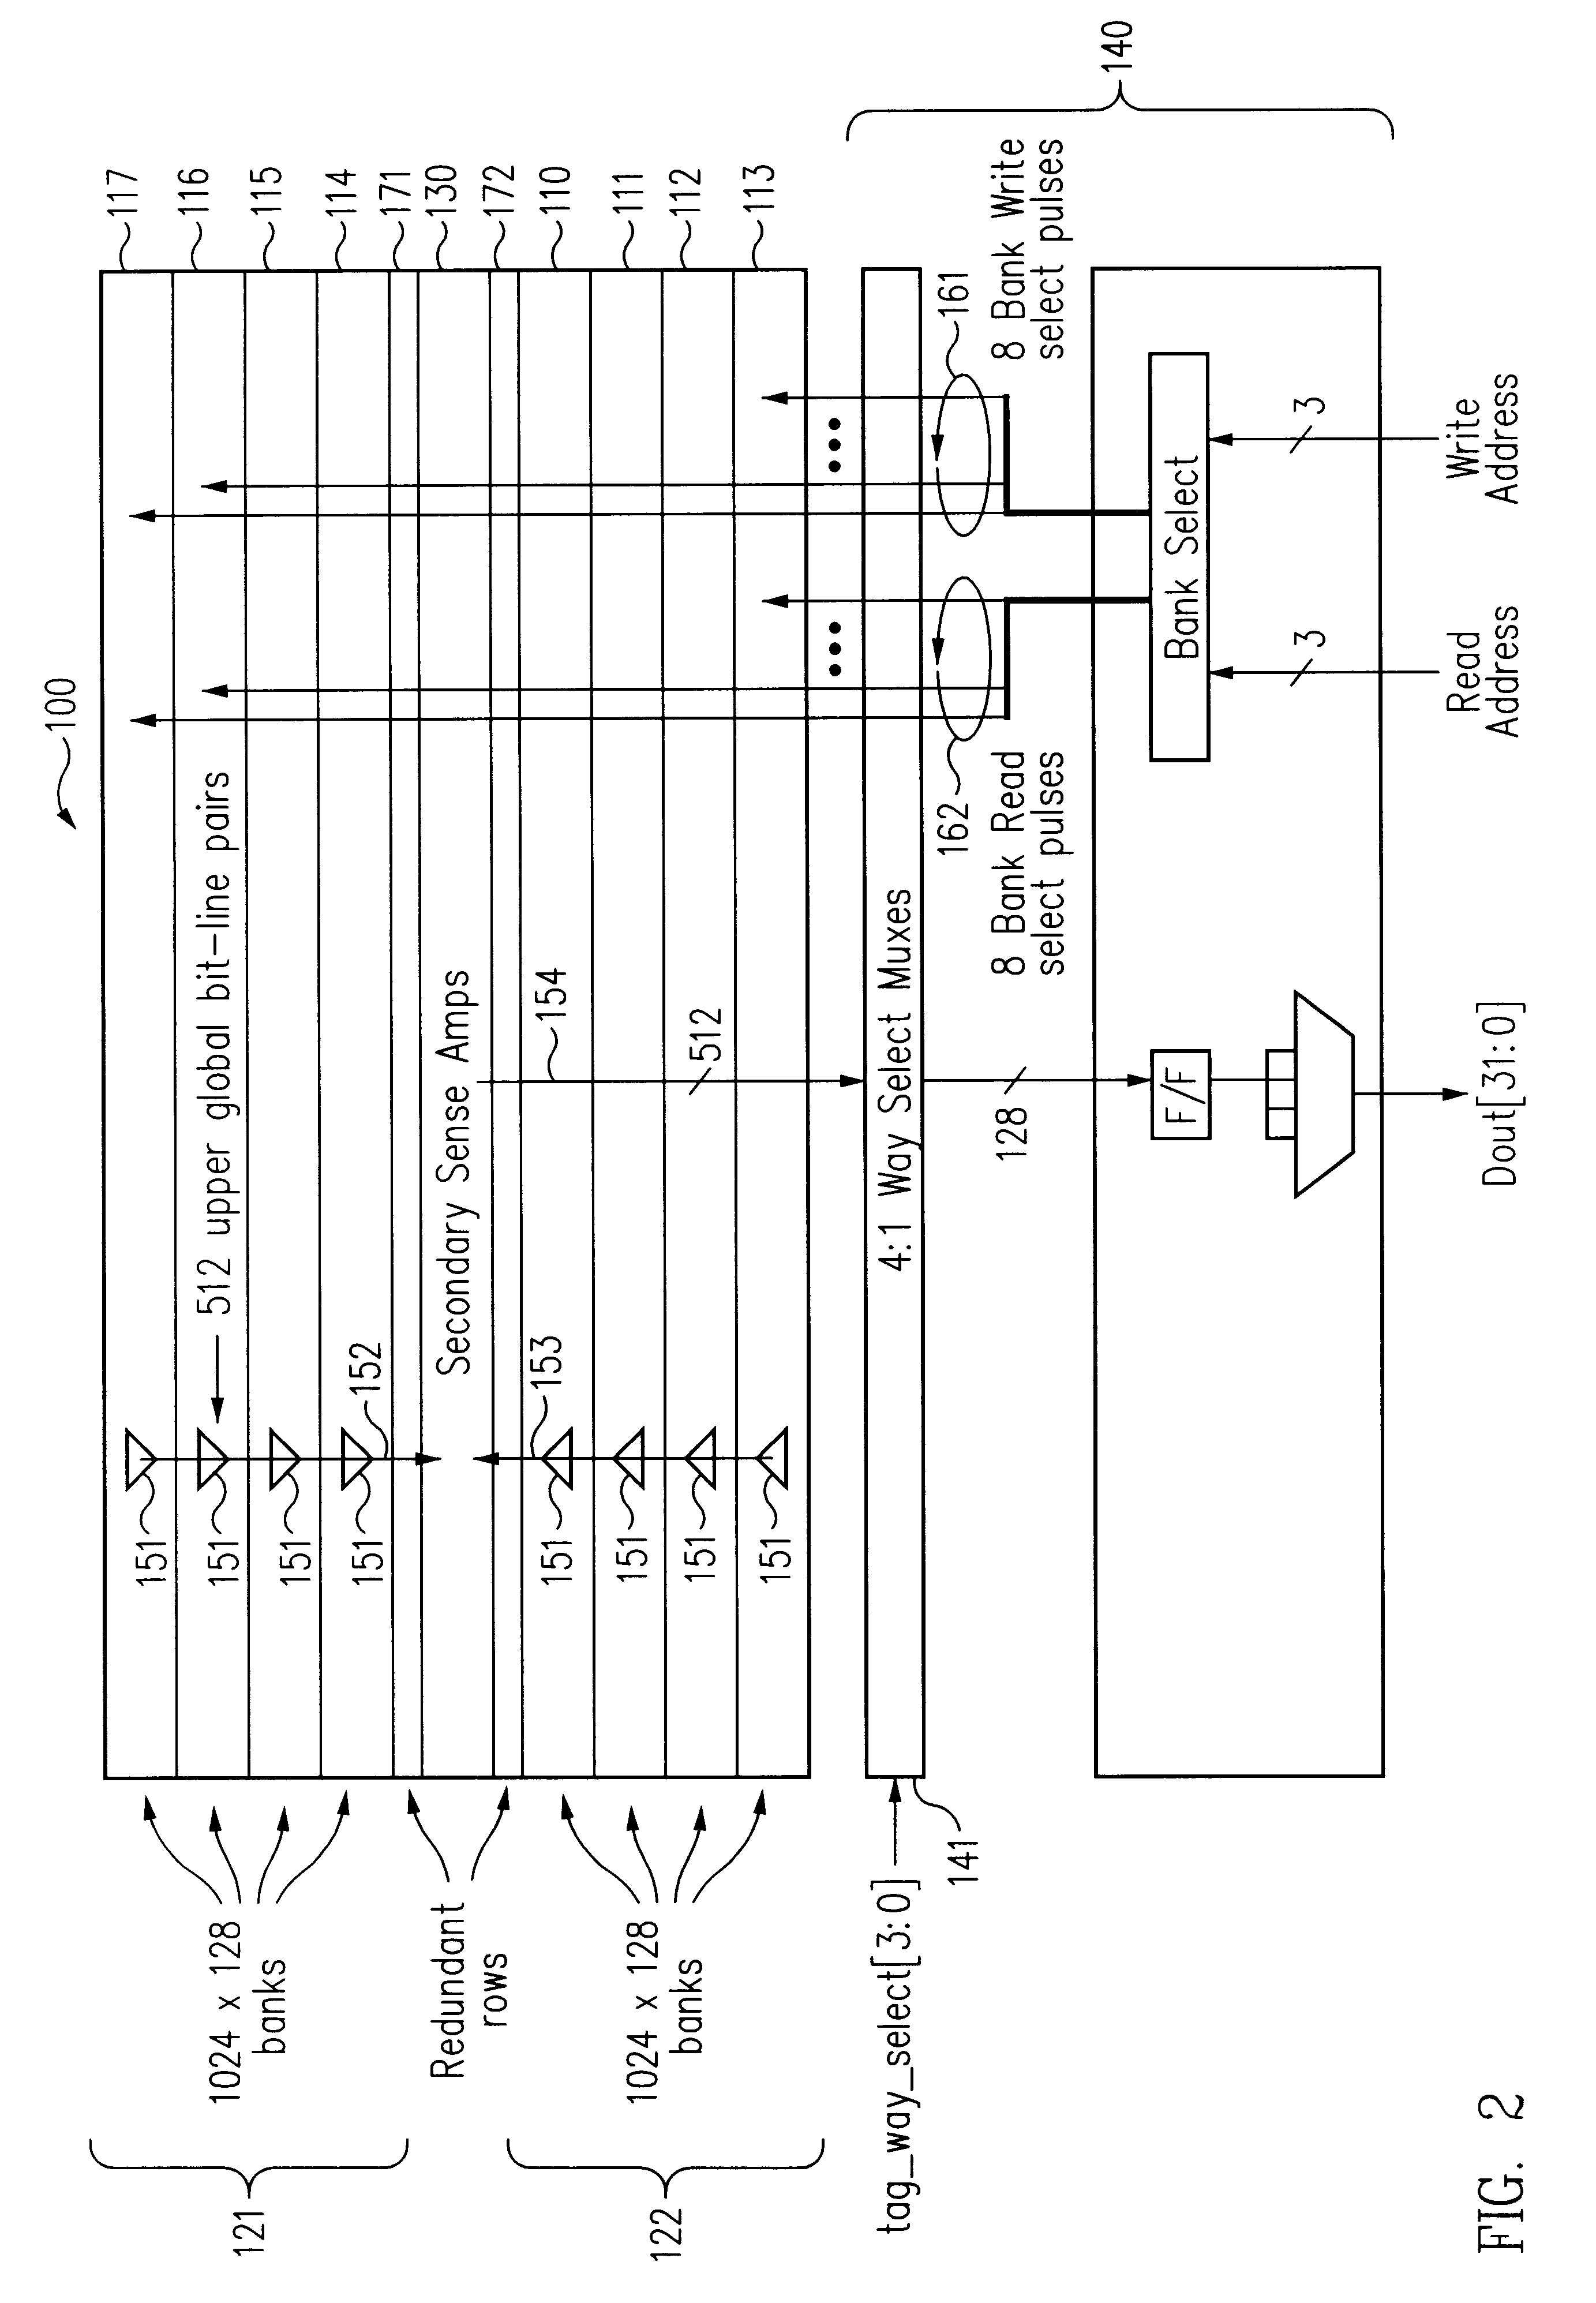 Layout for semiconductor memory including multi-level sensing